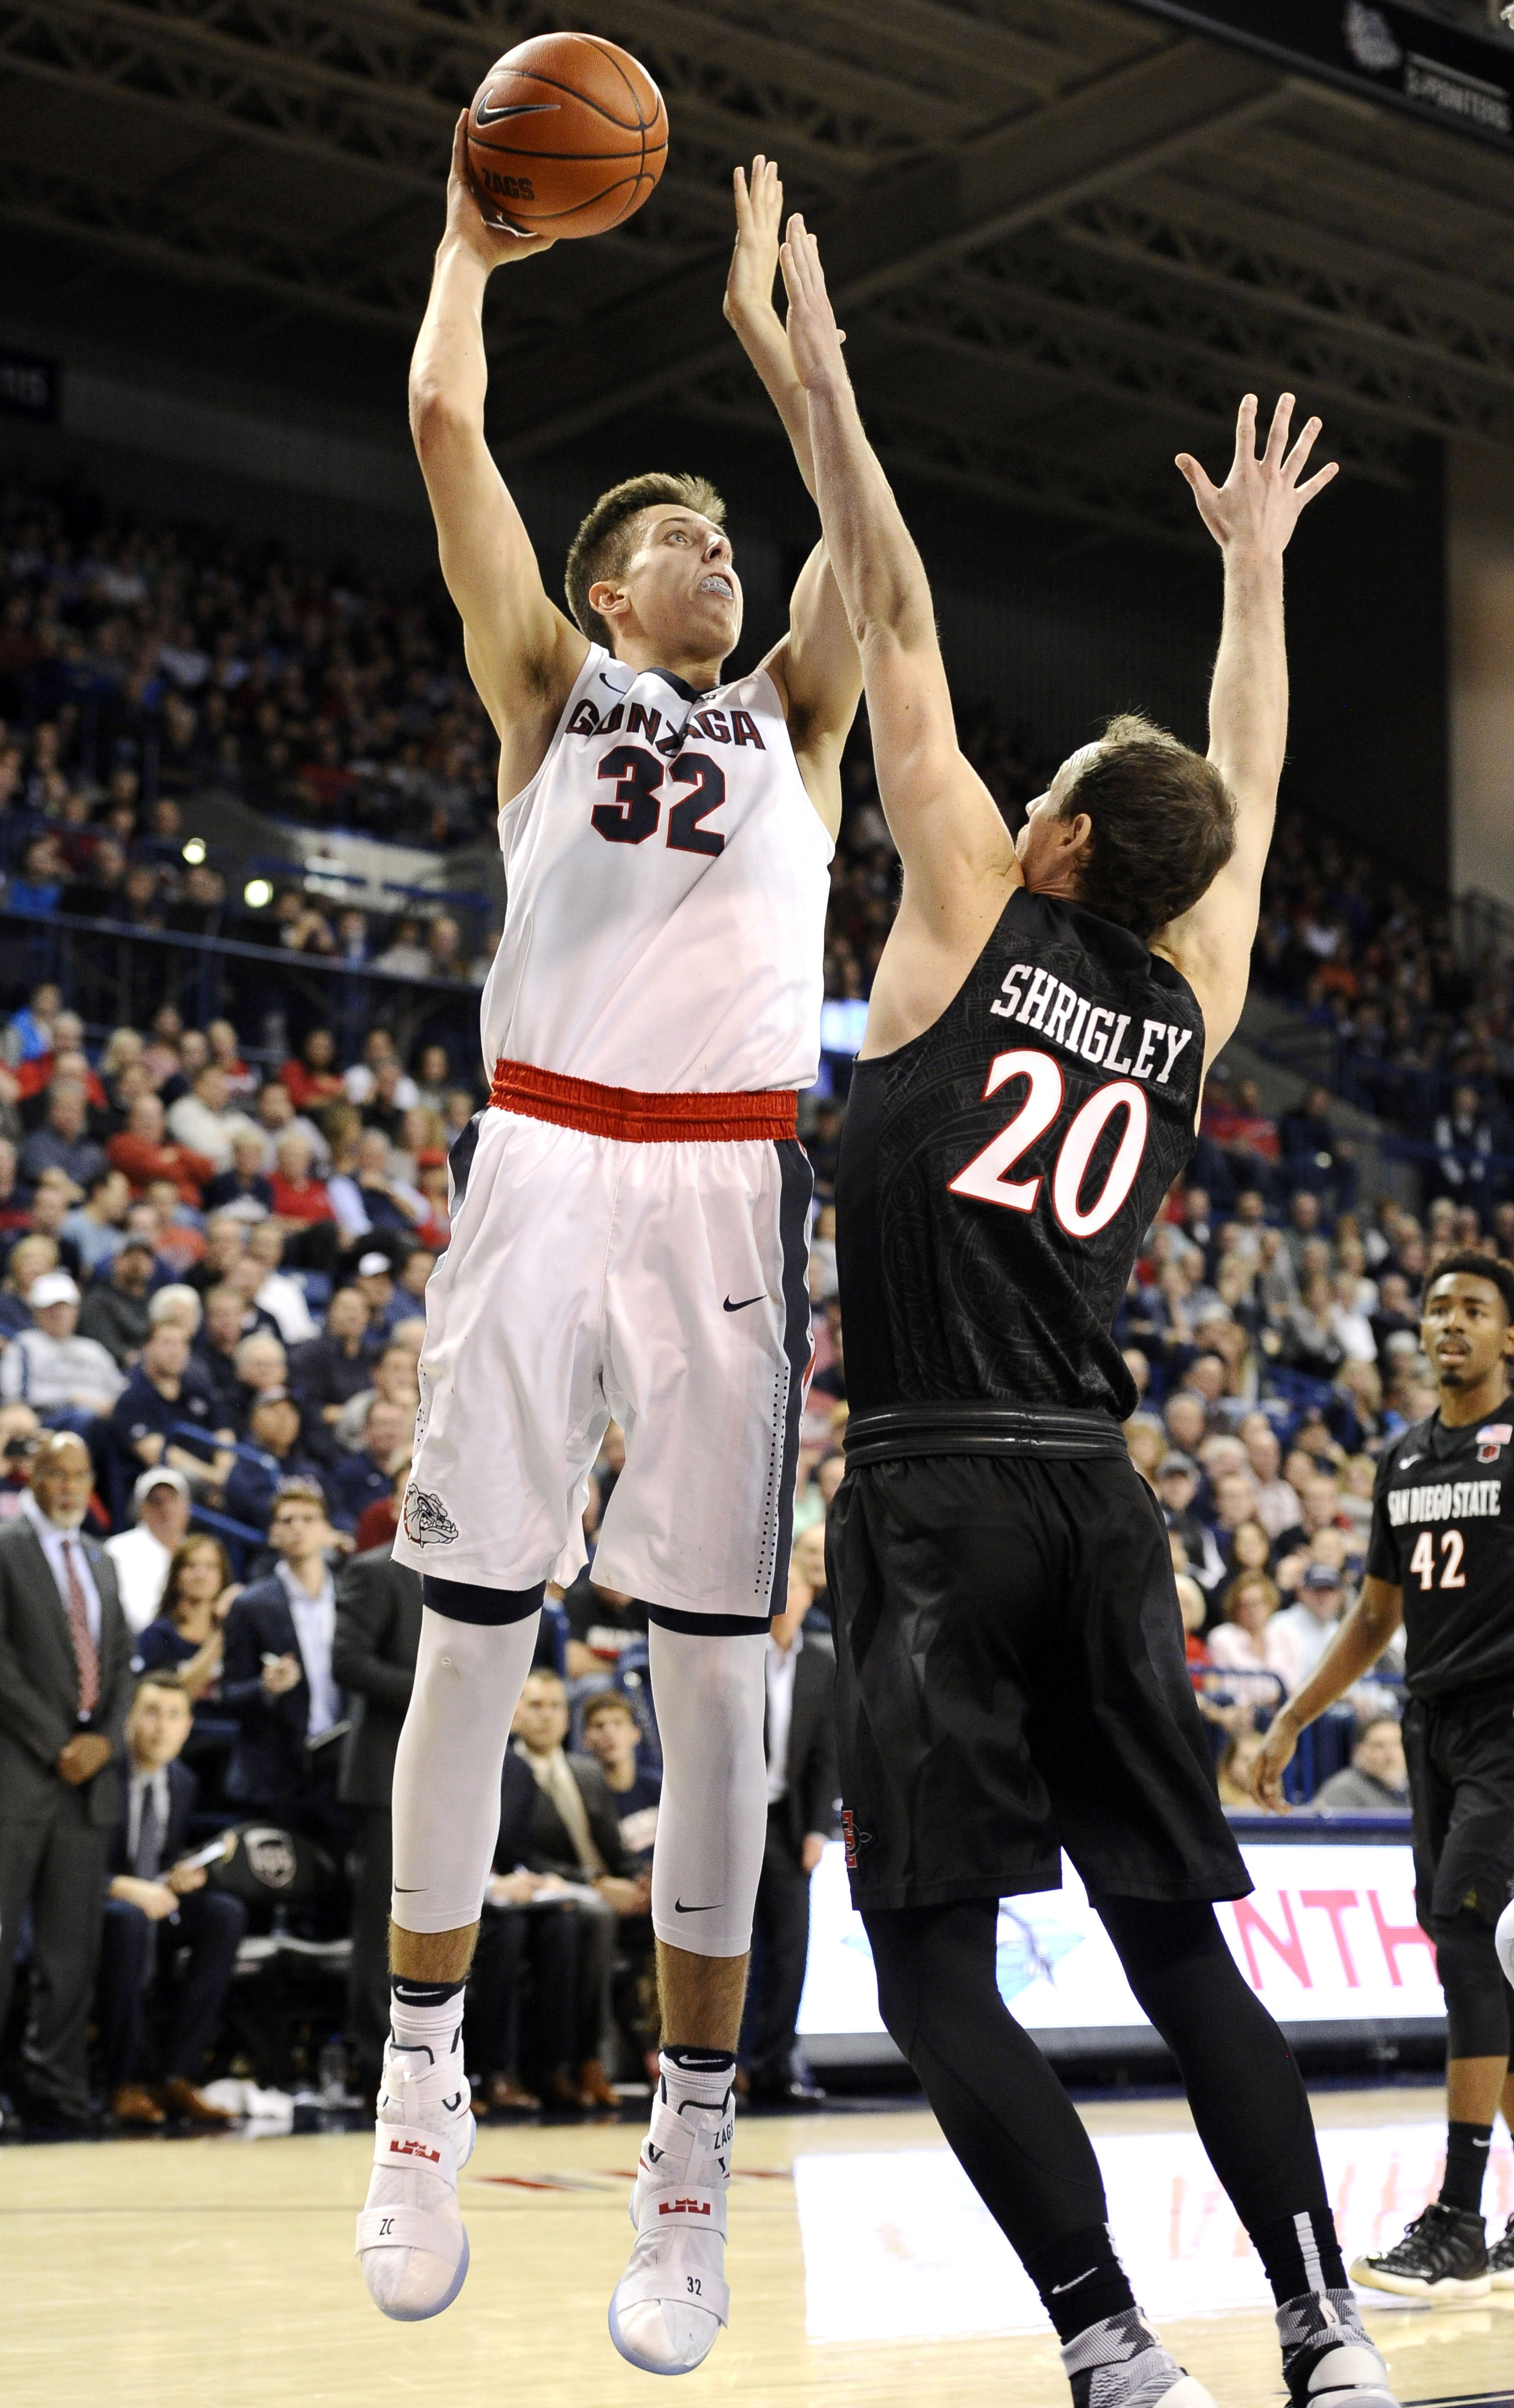 Nov 14, 2016; Spokane, WA, USA; Gonzaga Bulldogs forward Zach Collins (32) goes up for a shot against San Diego State Aztecs forward Matt Shrigley (20) during the first half at McCarthey Athletic Center. Mandatory Credit: James Snook-USA TODAY Sports